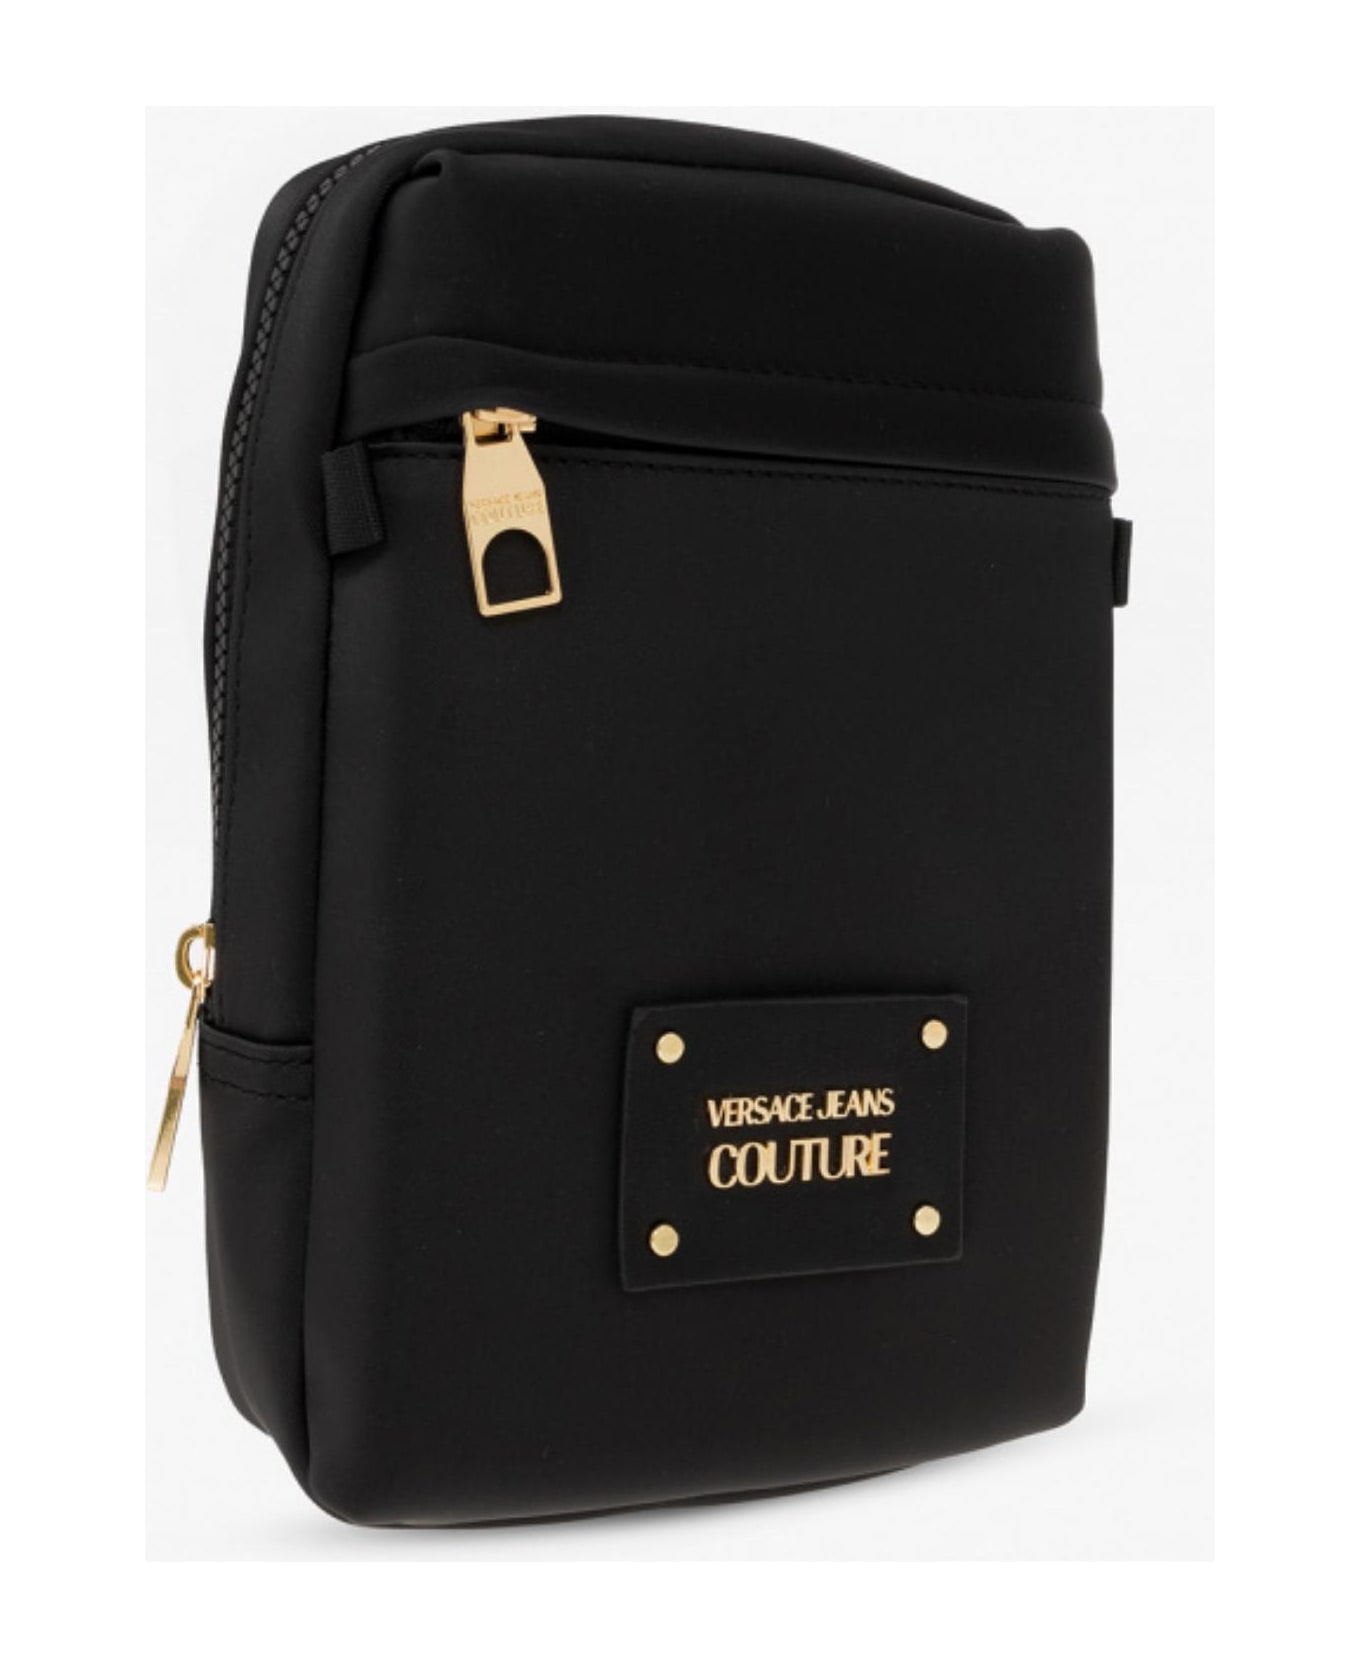 Versace Jeans Couture Bags Black - Black ショルダーバッグ